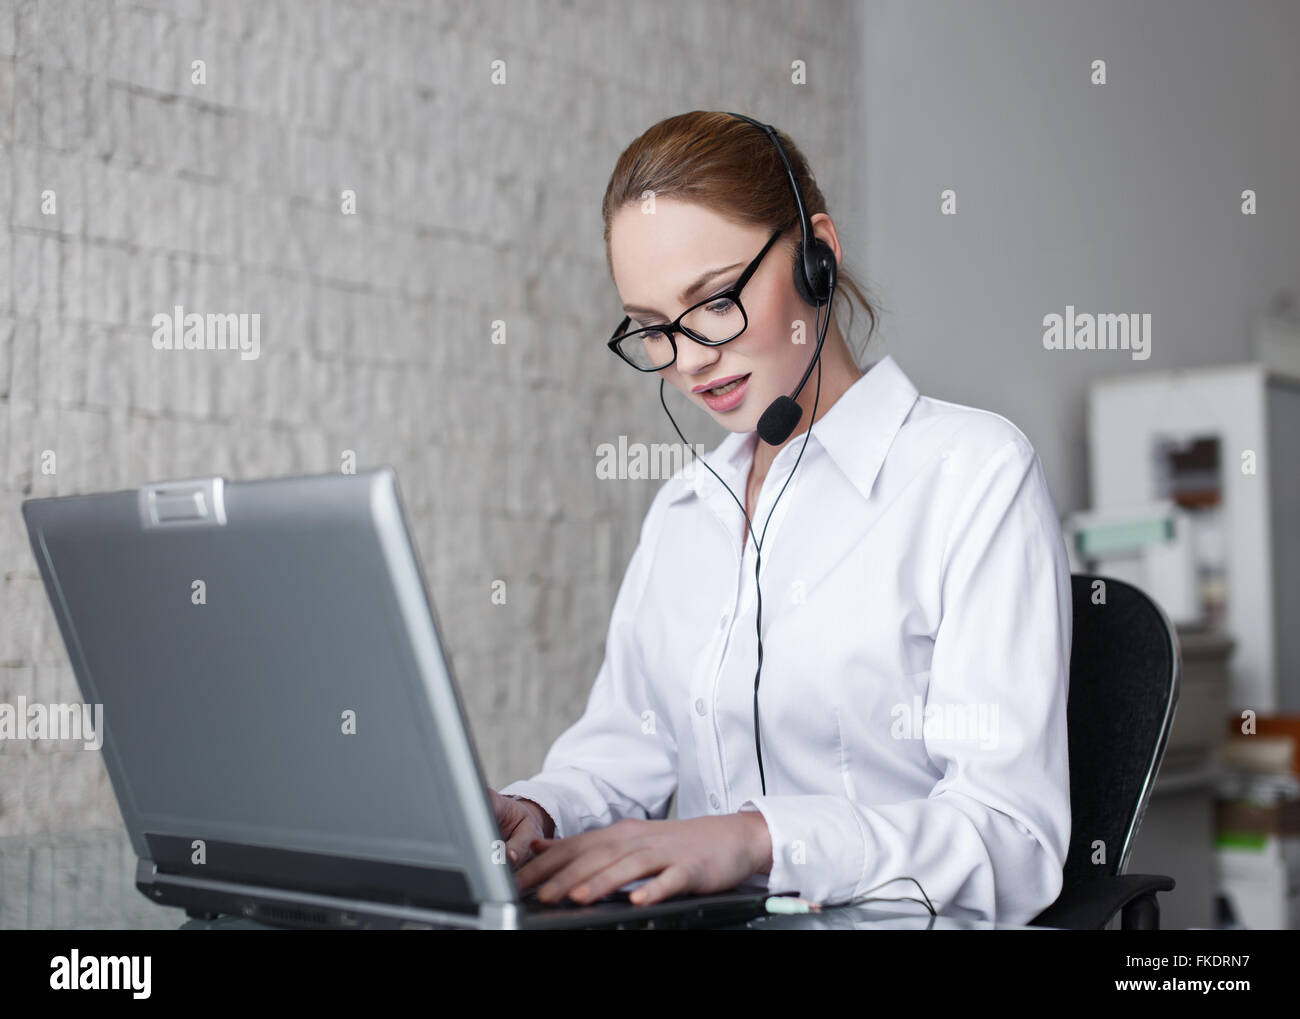 Blonde woman customer support in company, talking online Stock Photo